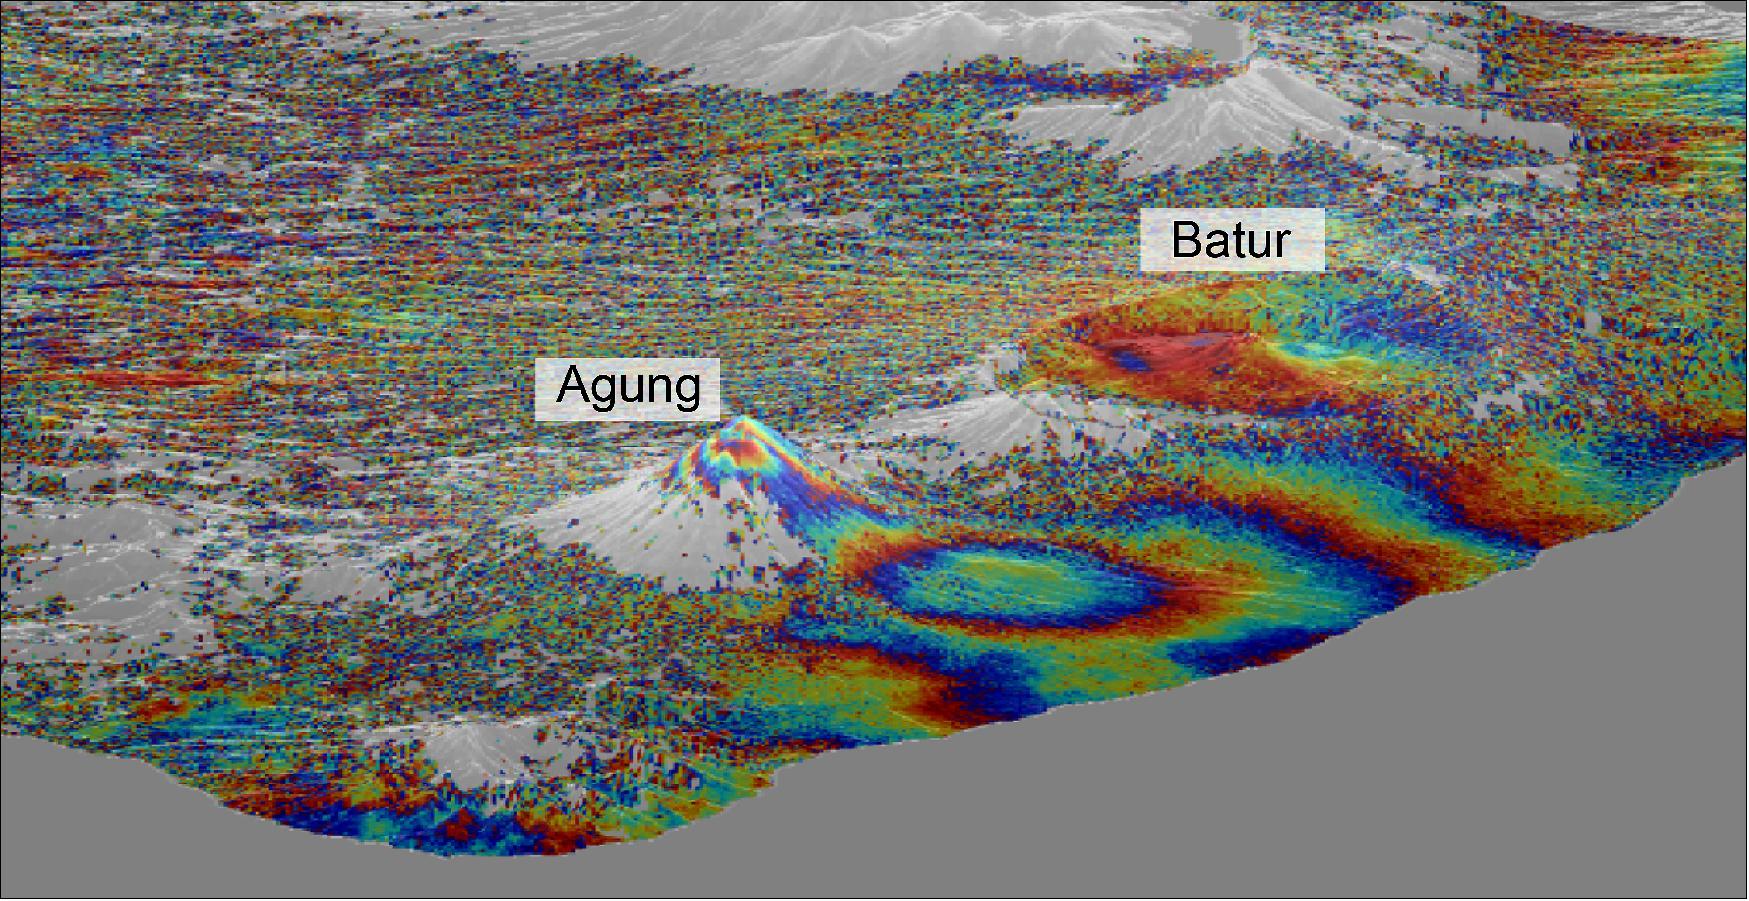 Figure 32: Copernicus Sentinel-1 InSAR data shows ground uplift on the flank of Mount Agung, which is on the island of Bali in Indonesia. The data show uplift between August and November 2017, prior to the eruption of Mount Agung on 27 November. The eruption was preceded by a wave of small earthquakes. A team led by Bristol University’s School of Earth Sciences in the UK used radar data from the Copernicus Sentinel-1 radar mission and the technique of InSAR to map ground motion, which may indicate that fresh magma is moving beneath the volcano. Their research provides the first geophysical evidence that Agung and the neighboring Batur volcano may have a connected plumbing system (image credit: ESA, the image contains modified Copernicus Sentinel data (2017), processed by University of Bristol/COMET)